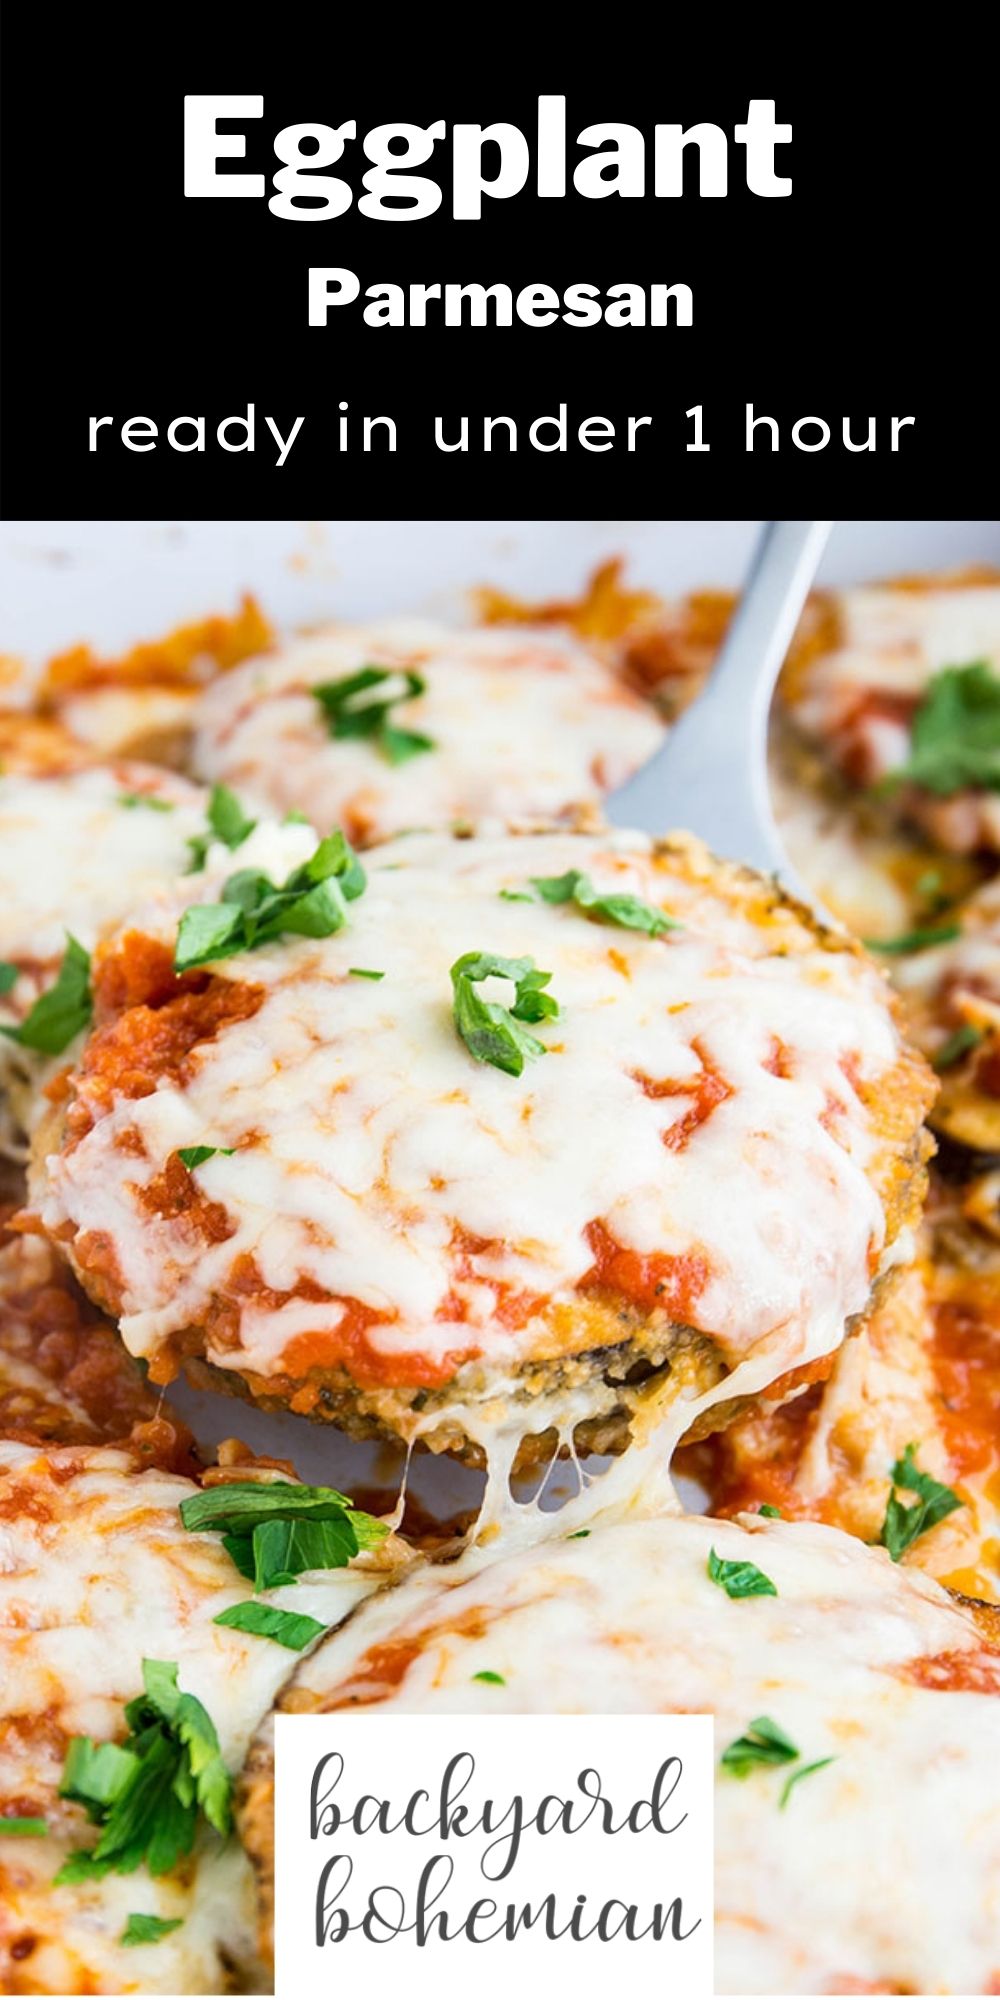 Baked eggplant parmesan is made with crispy baked eggplant layered with homemade marinara sauce and loads of melted mozzarella cheese. This is the perfect comfort meal! via @foodhussy